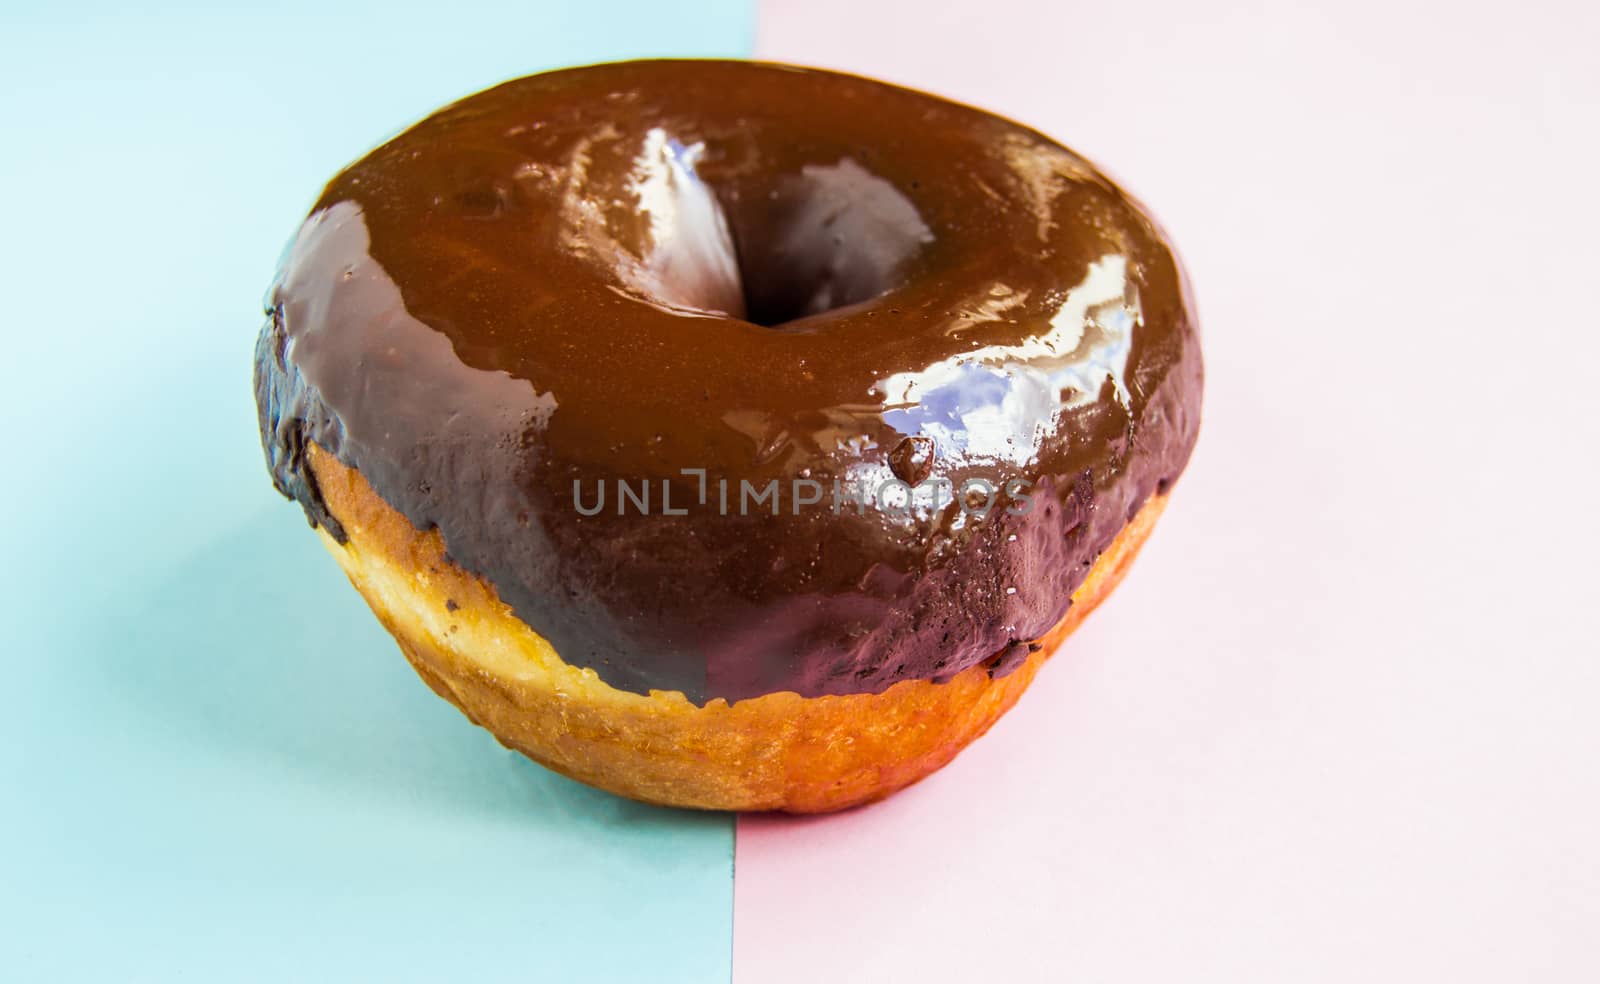 Delicious donut with shiny chocolate icing on pastel pink-blue background, close-up, side view.